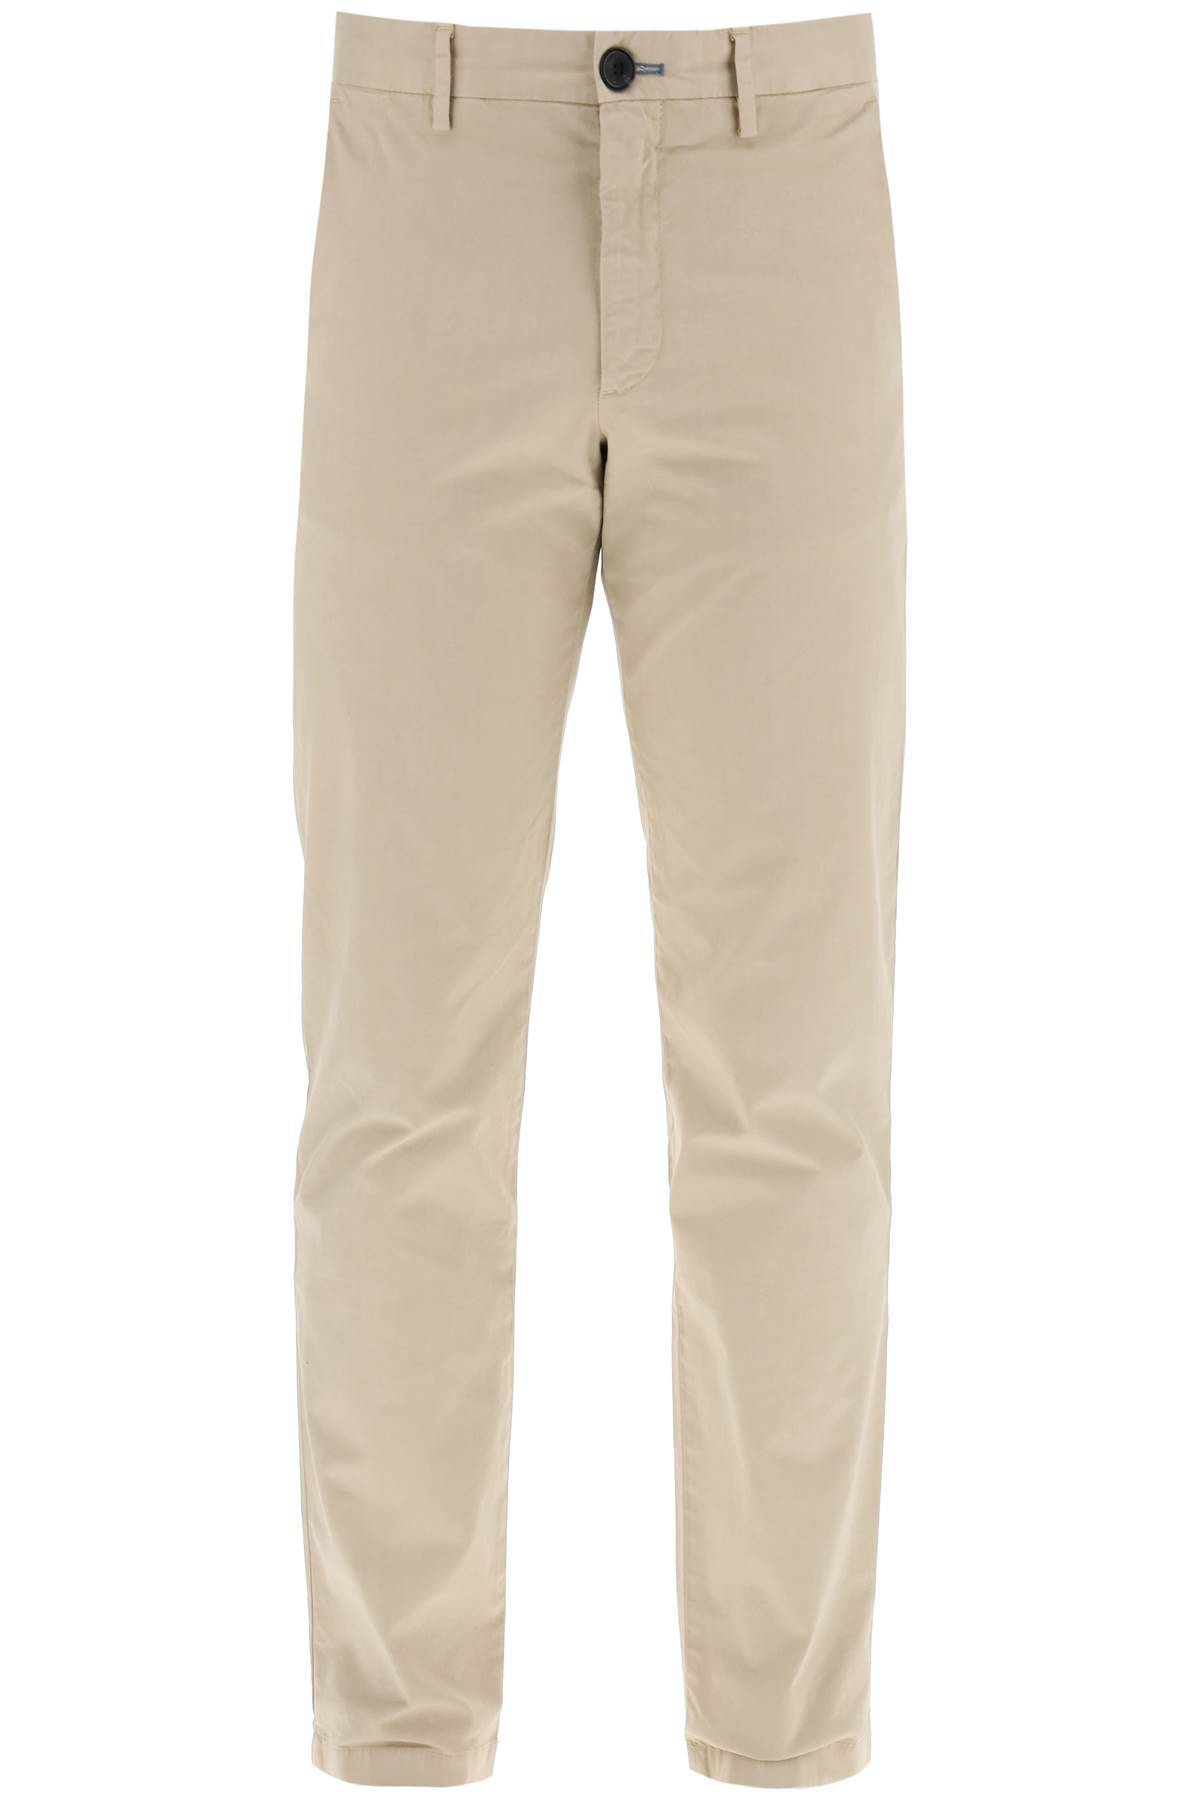 Ps Paul Smith PS PAUL SMITH cotton stretch chino pants for